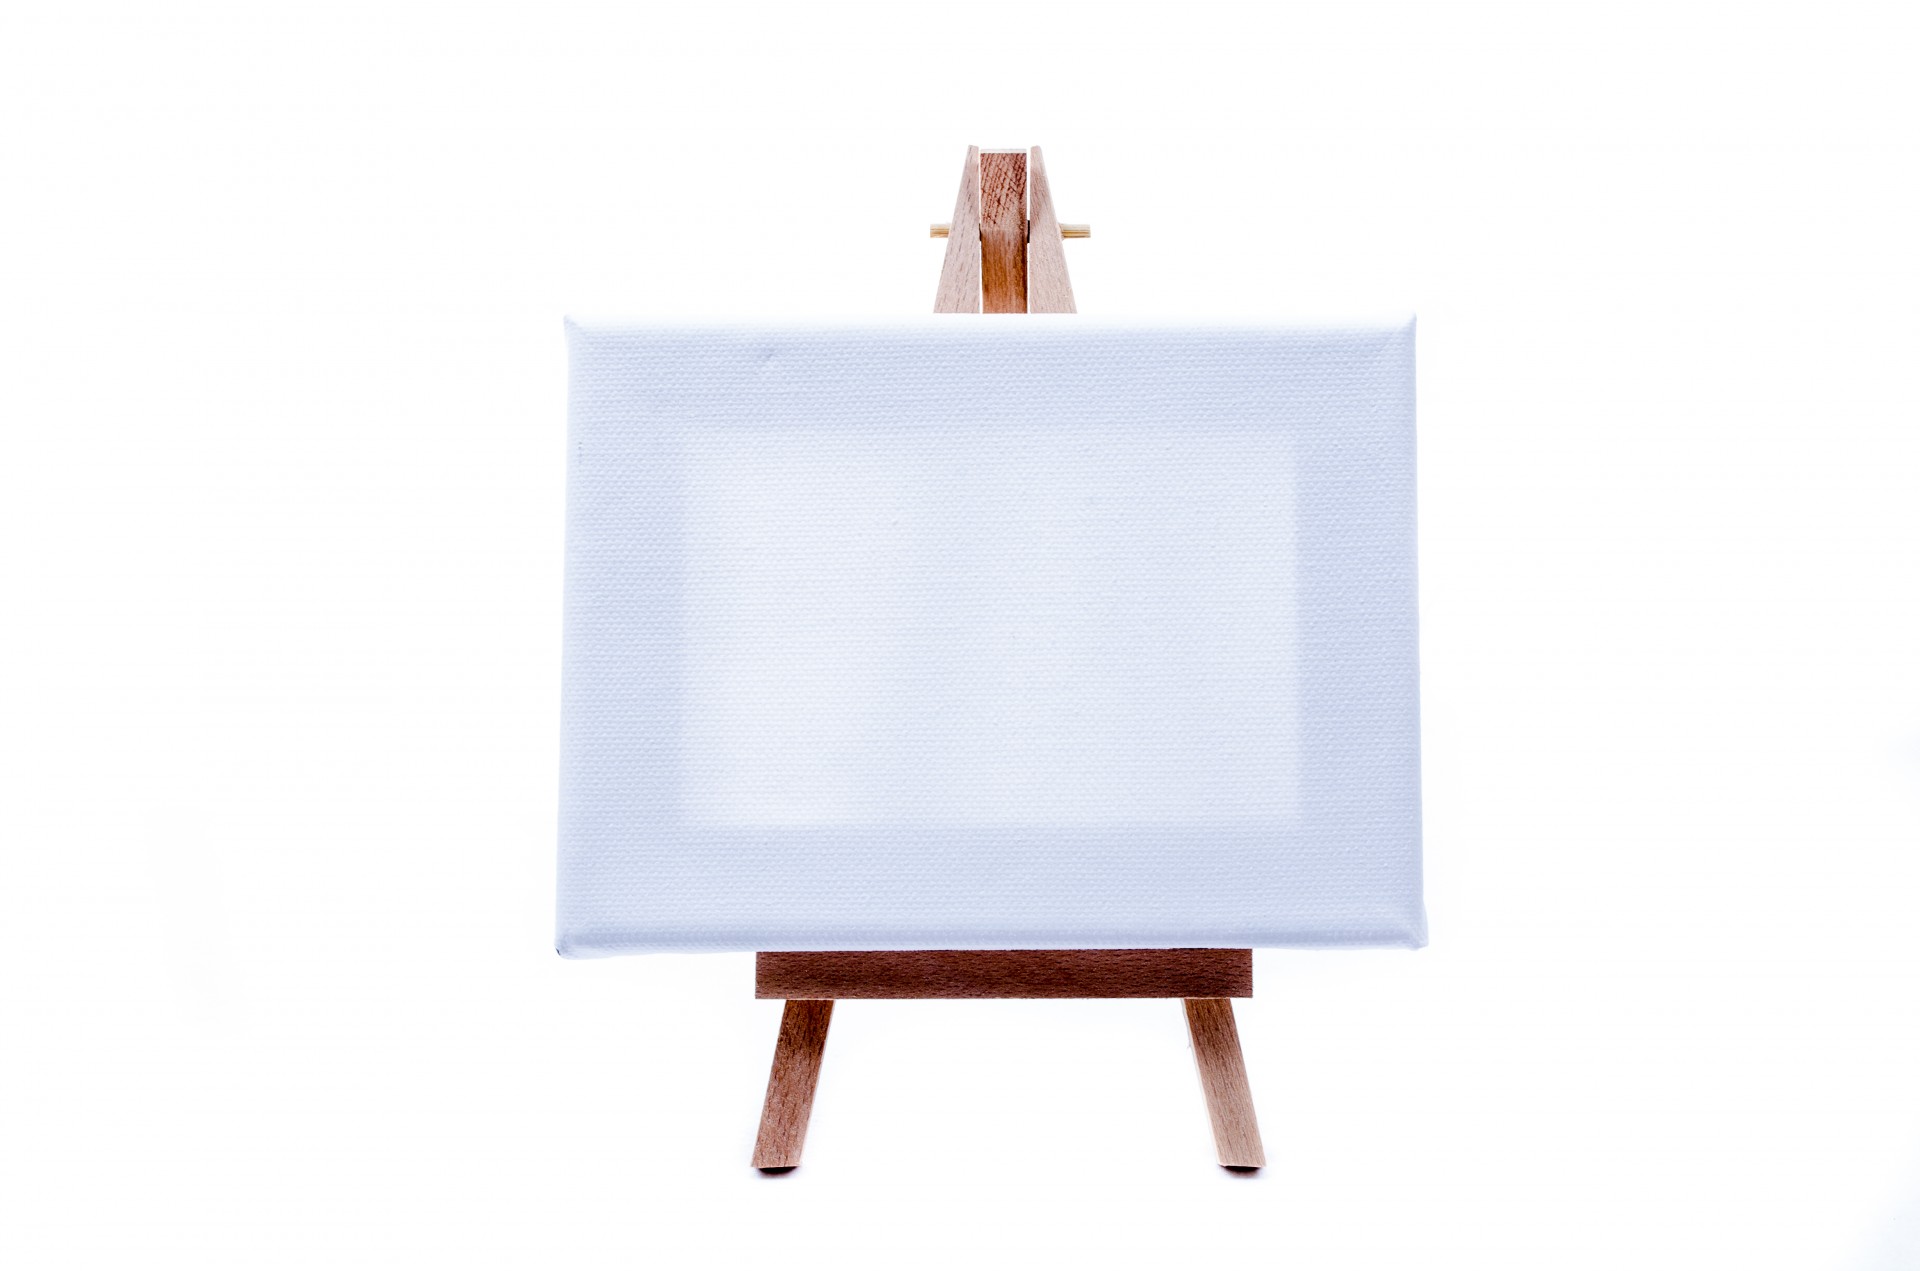 Small Easel With A Blank Canvas